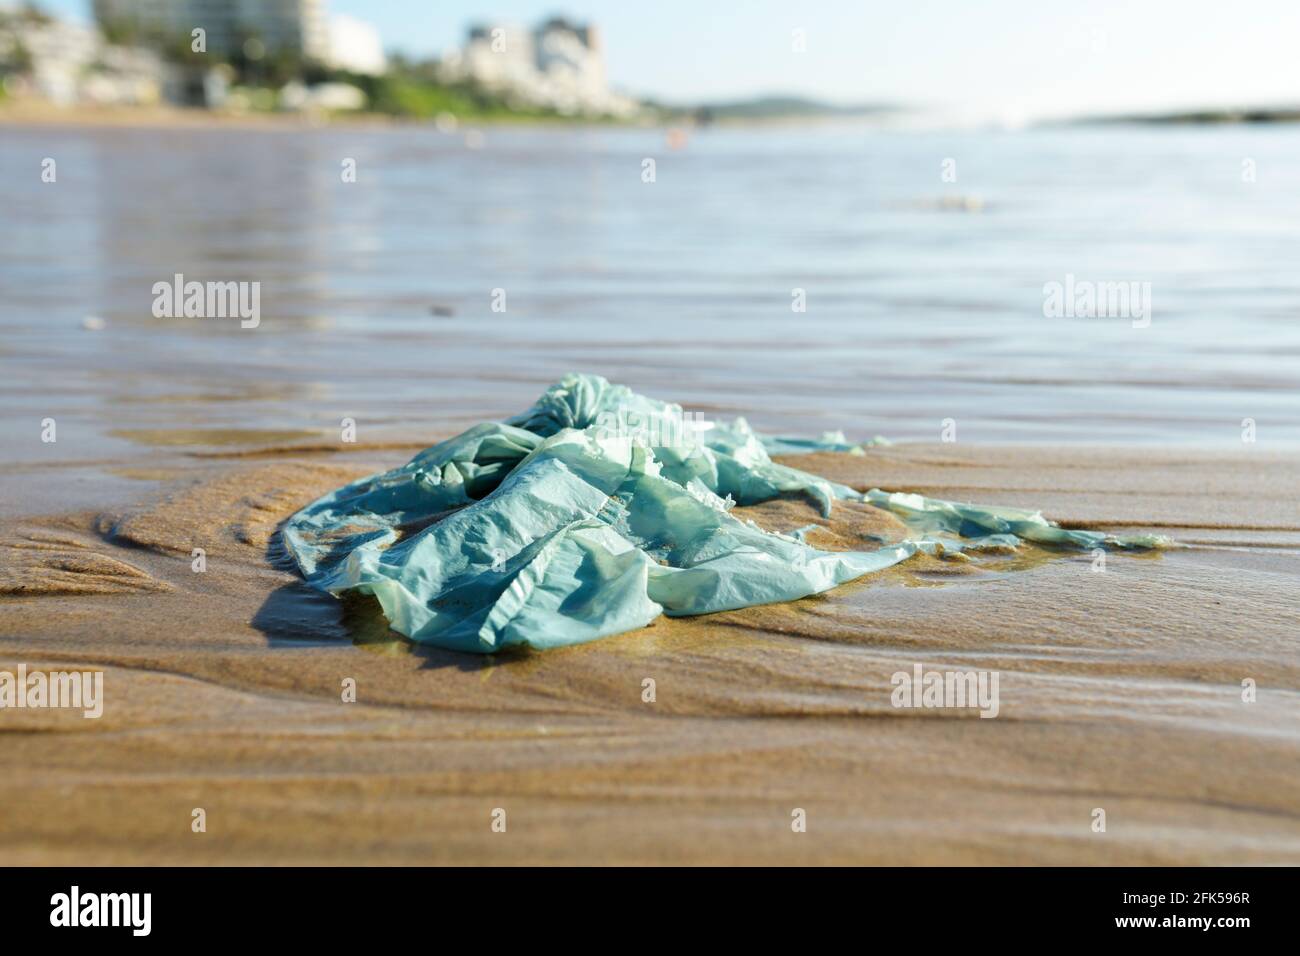 Plastic shopping bag pollution, waste on beautiful beach, Umhlanga Rocks waterfront, Durban, South Africa, close up, packaging object, single use Stock Photo